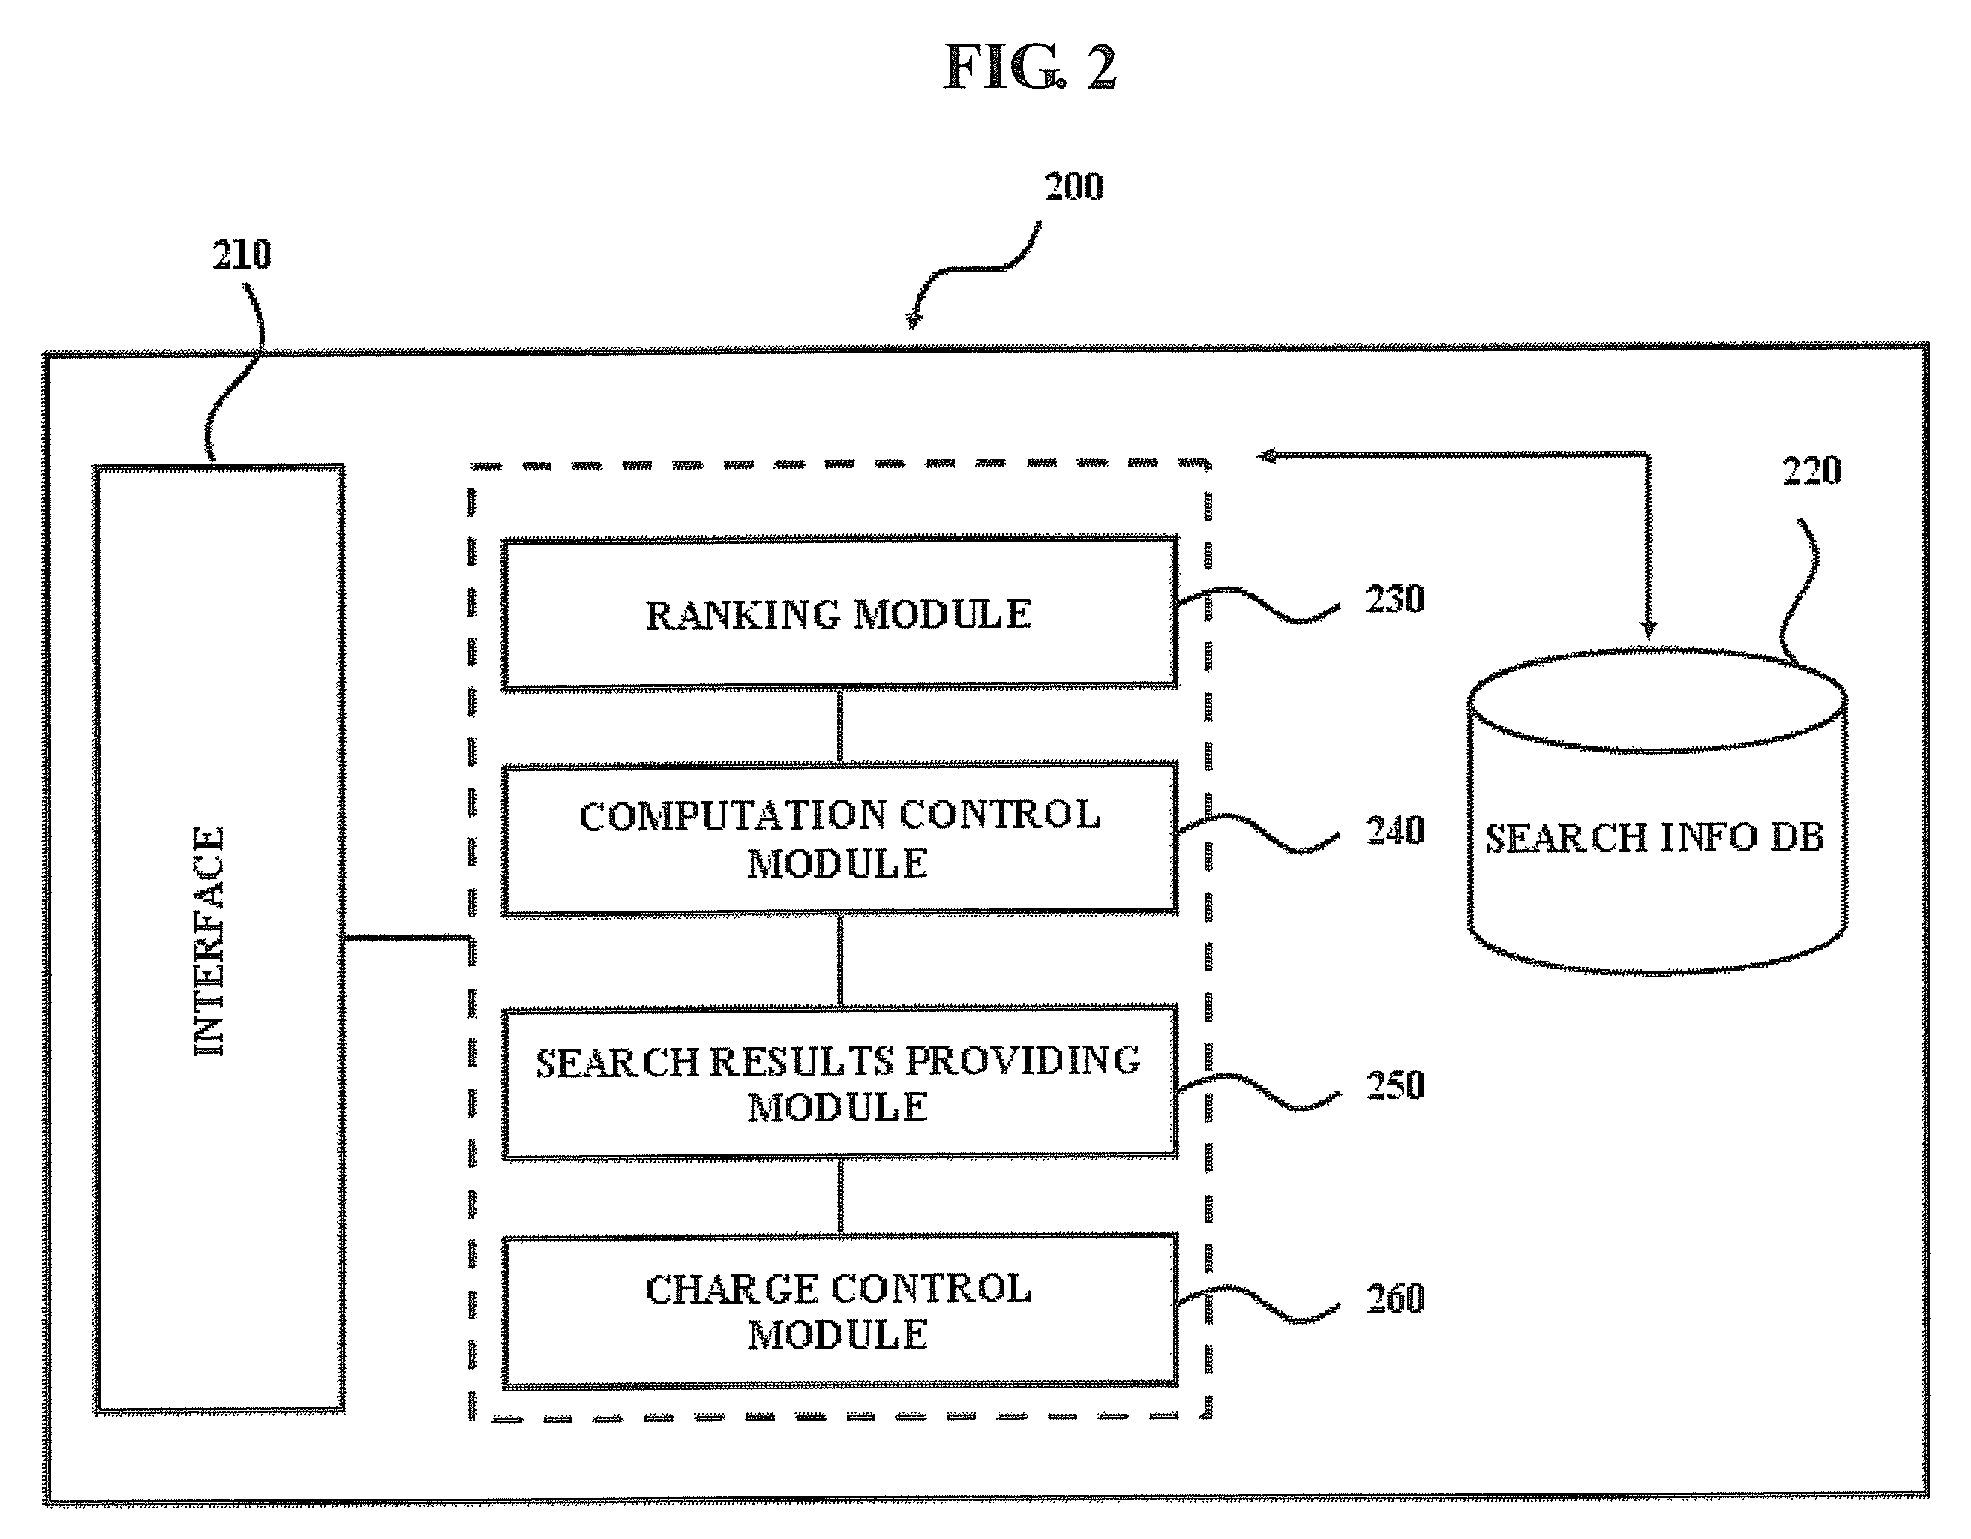 System and method for selecting search listing in an internet search engine and ordering the search listings